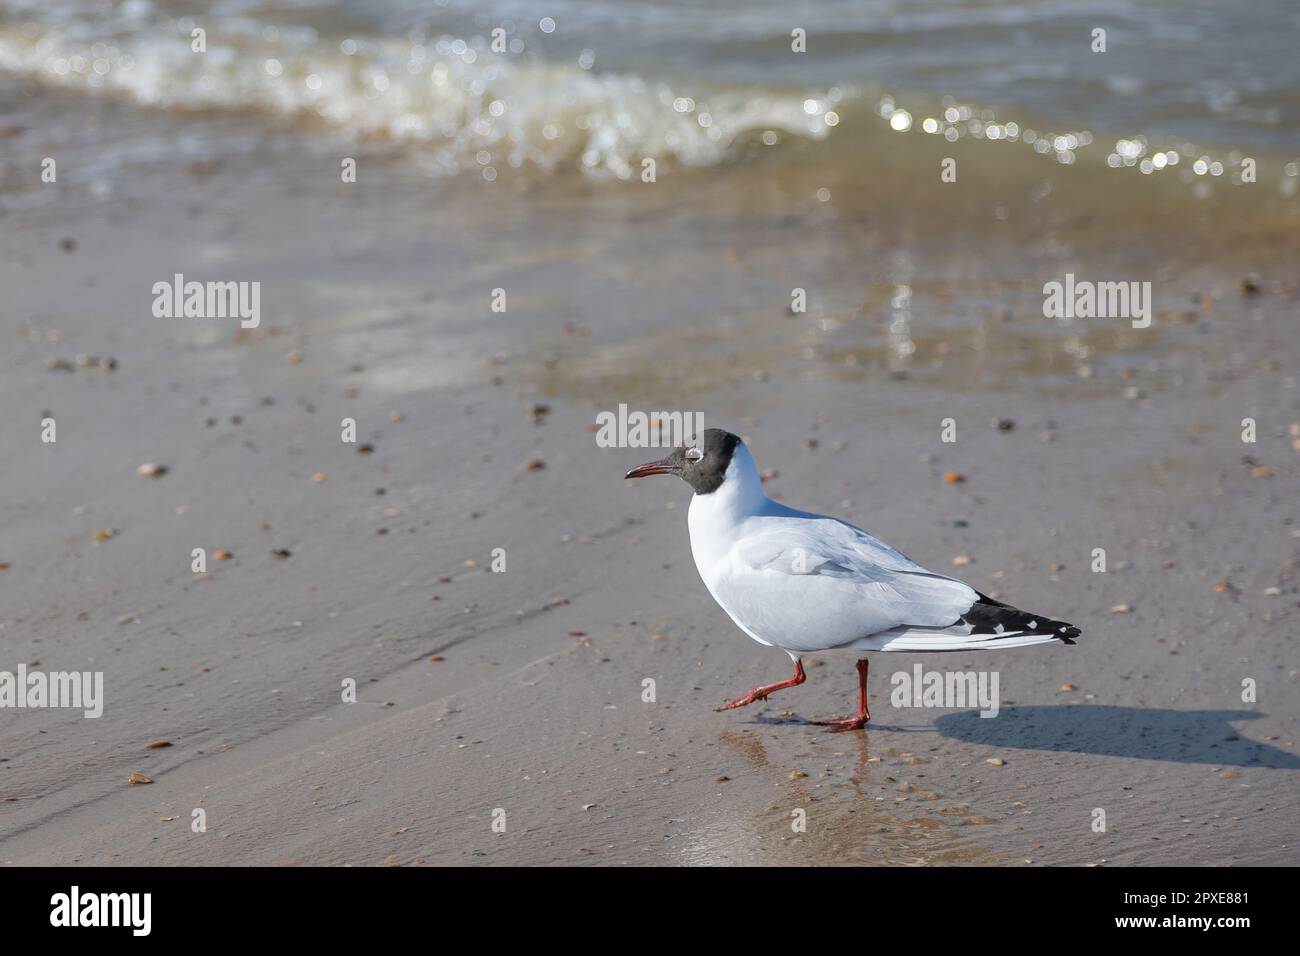 A seagull (larum) walks in the sand of a beach close to the waterline of the North sea Stock Photo